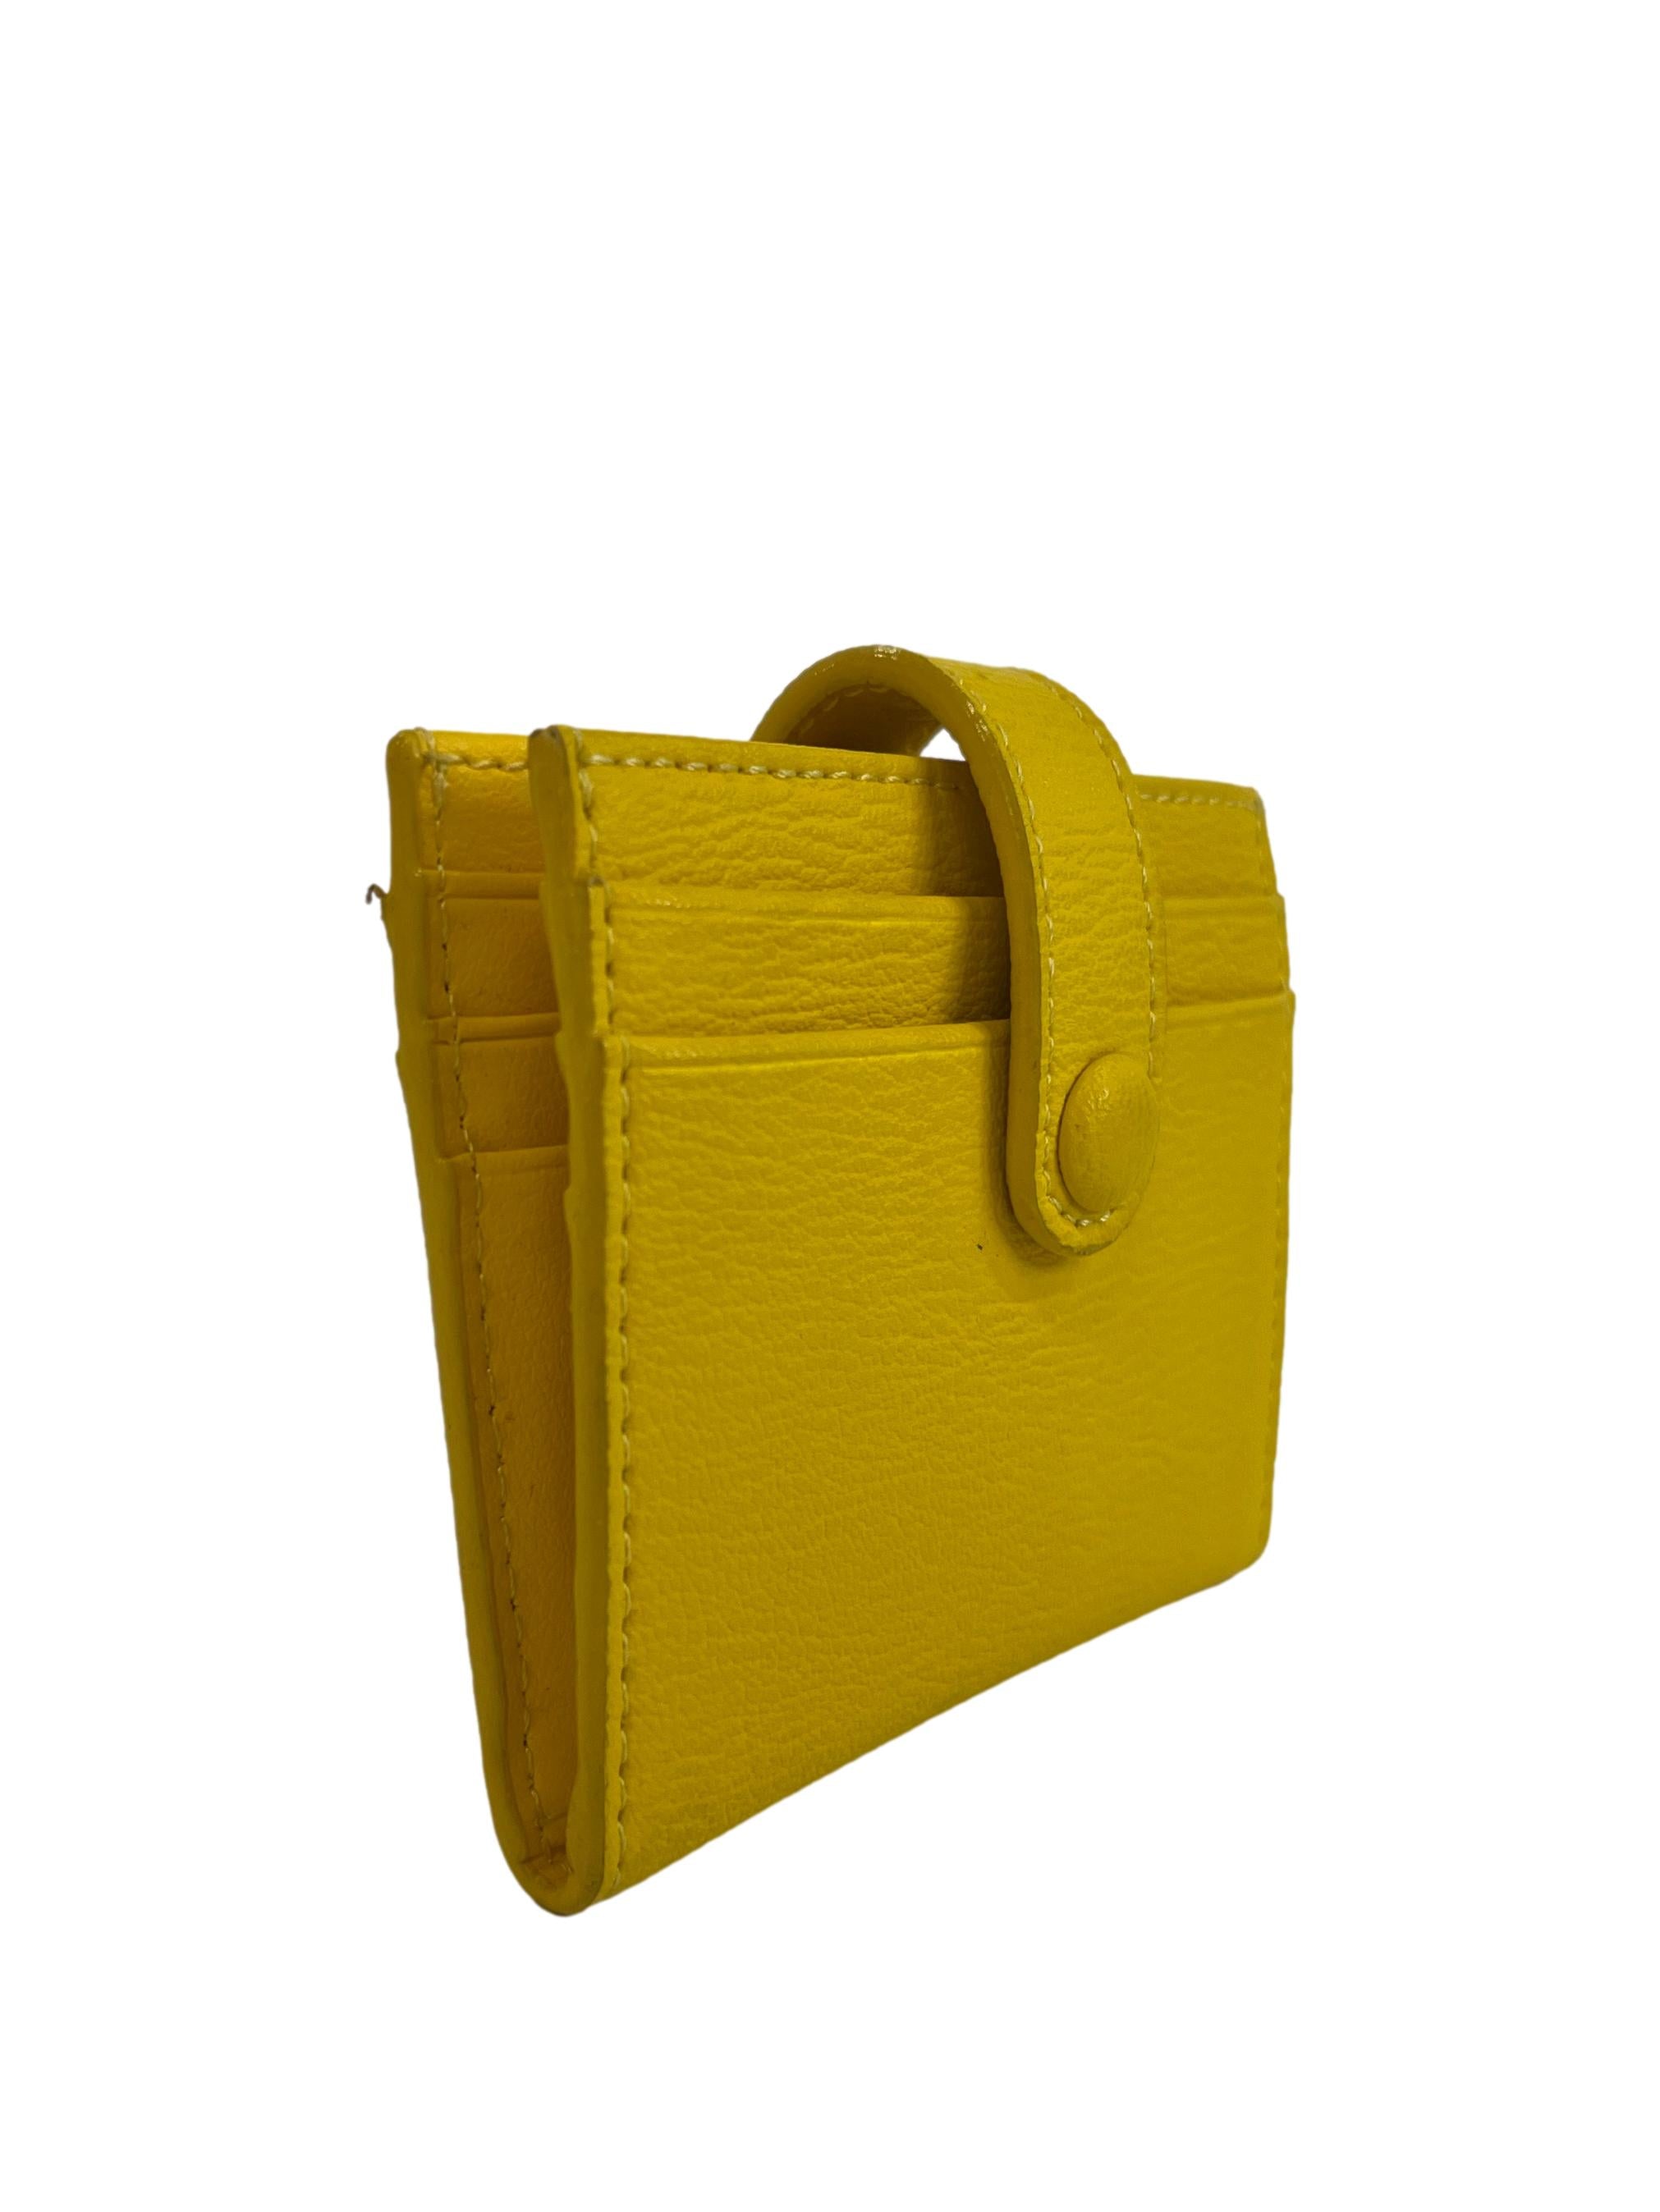 Canary Yellow Snap Button Card Holder